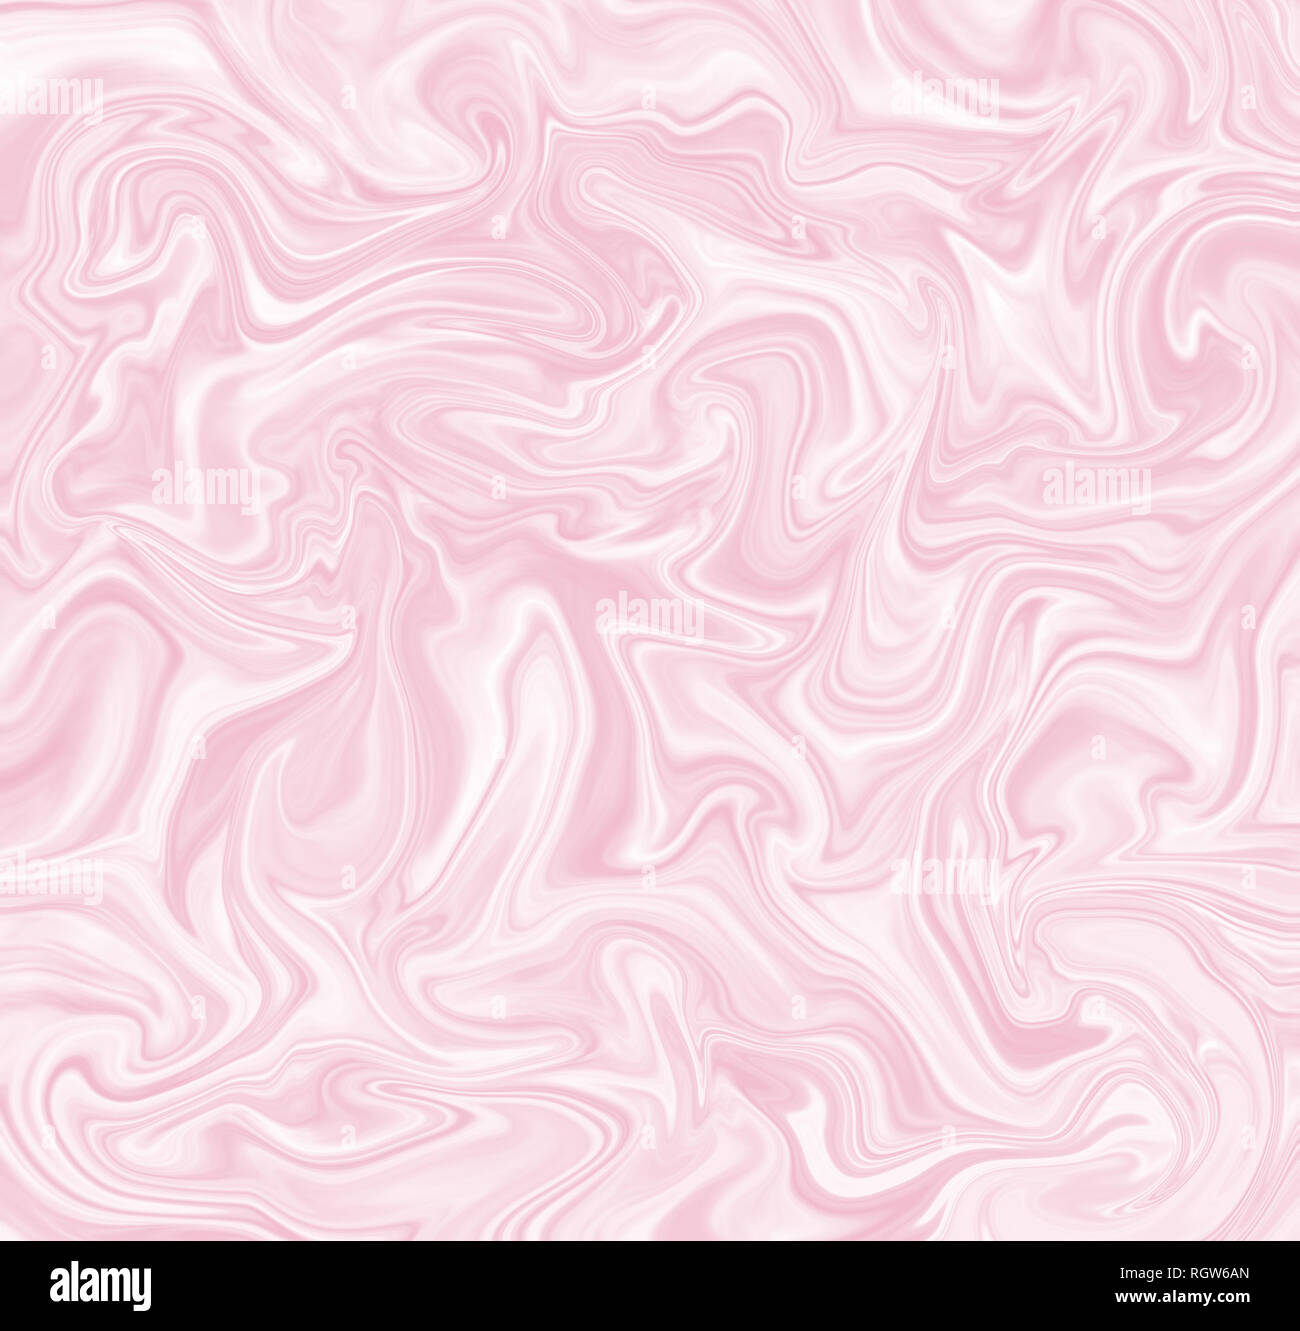 High resolution liquid marble texture design, light pink marbling satin or silk-like surface. Vibrant abstract digital paint design background. Stock Photo